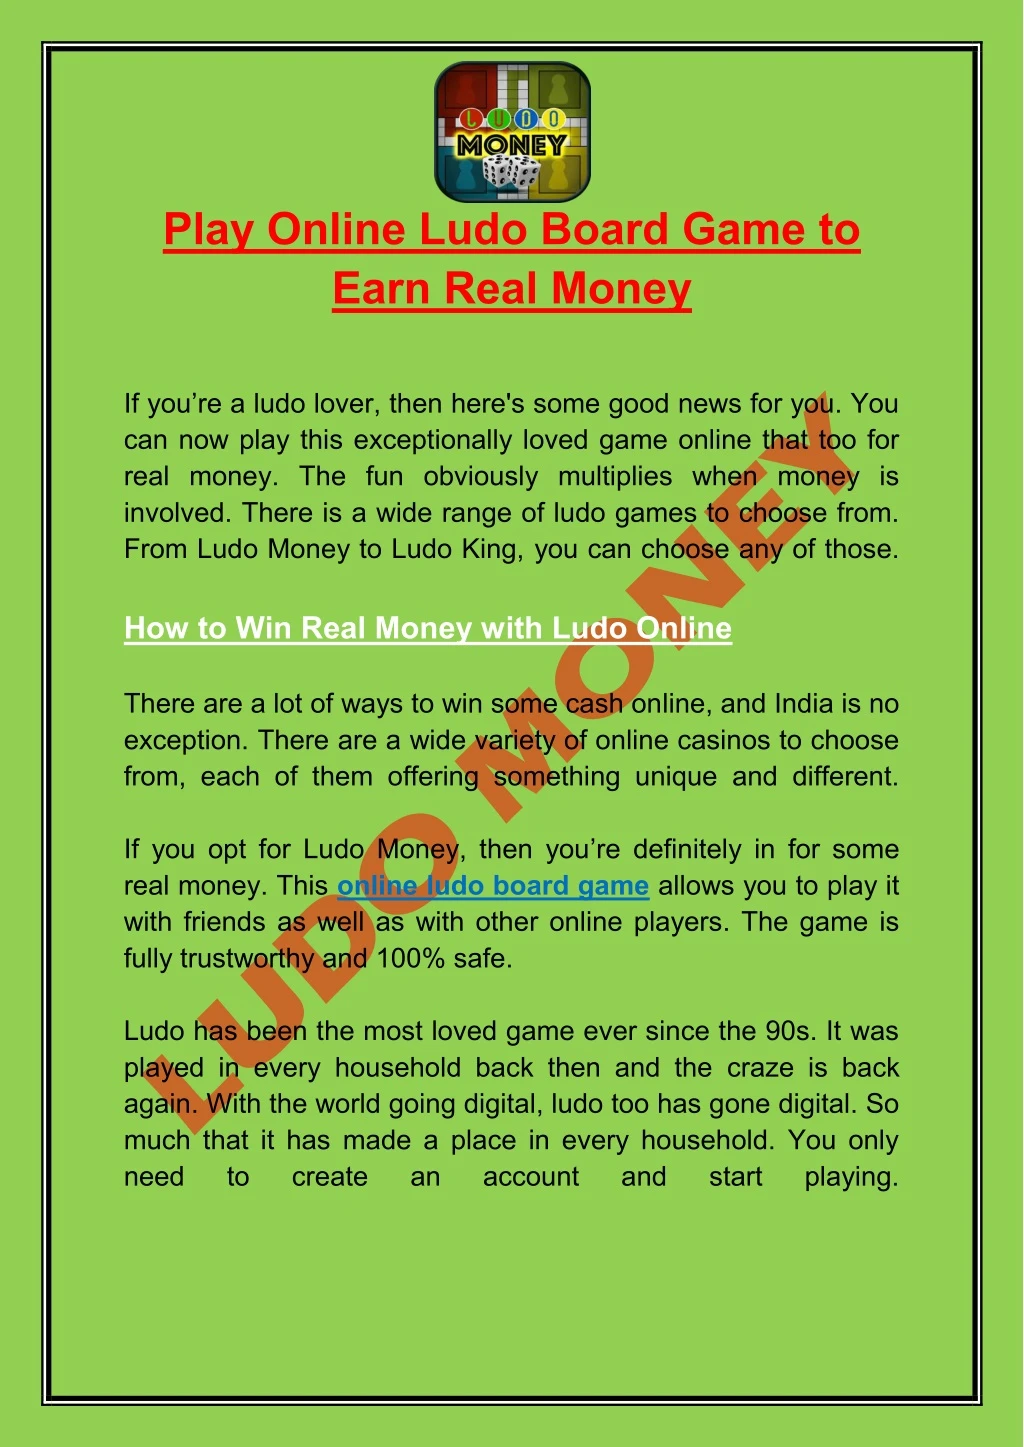 play online ludo board game to earn real money